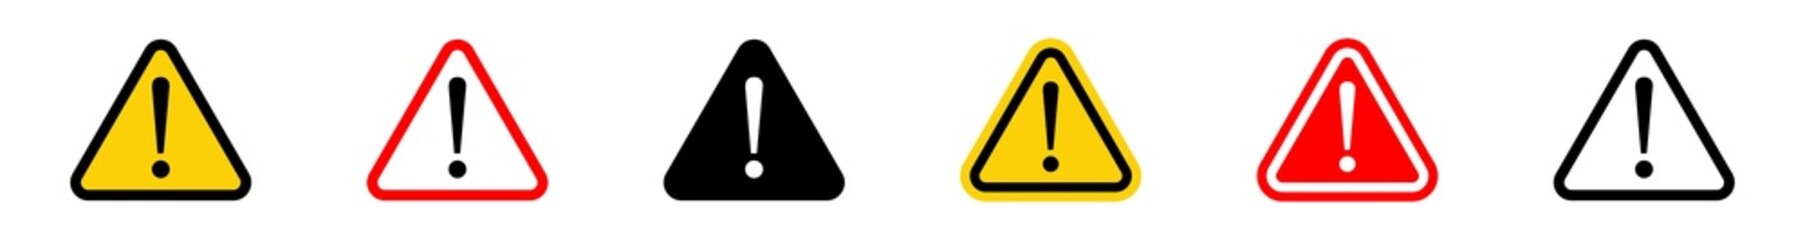 Exclamation mark on triangle sign. Warning icon set. Hazard warning attention sign. Isolated attention symbols on white background. Vector illustration.	